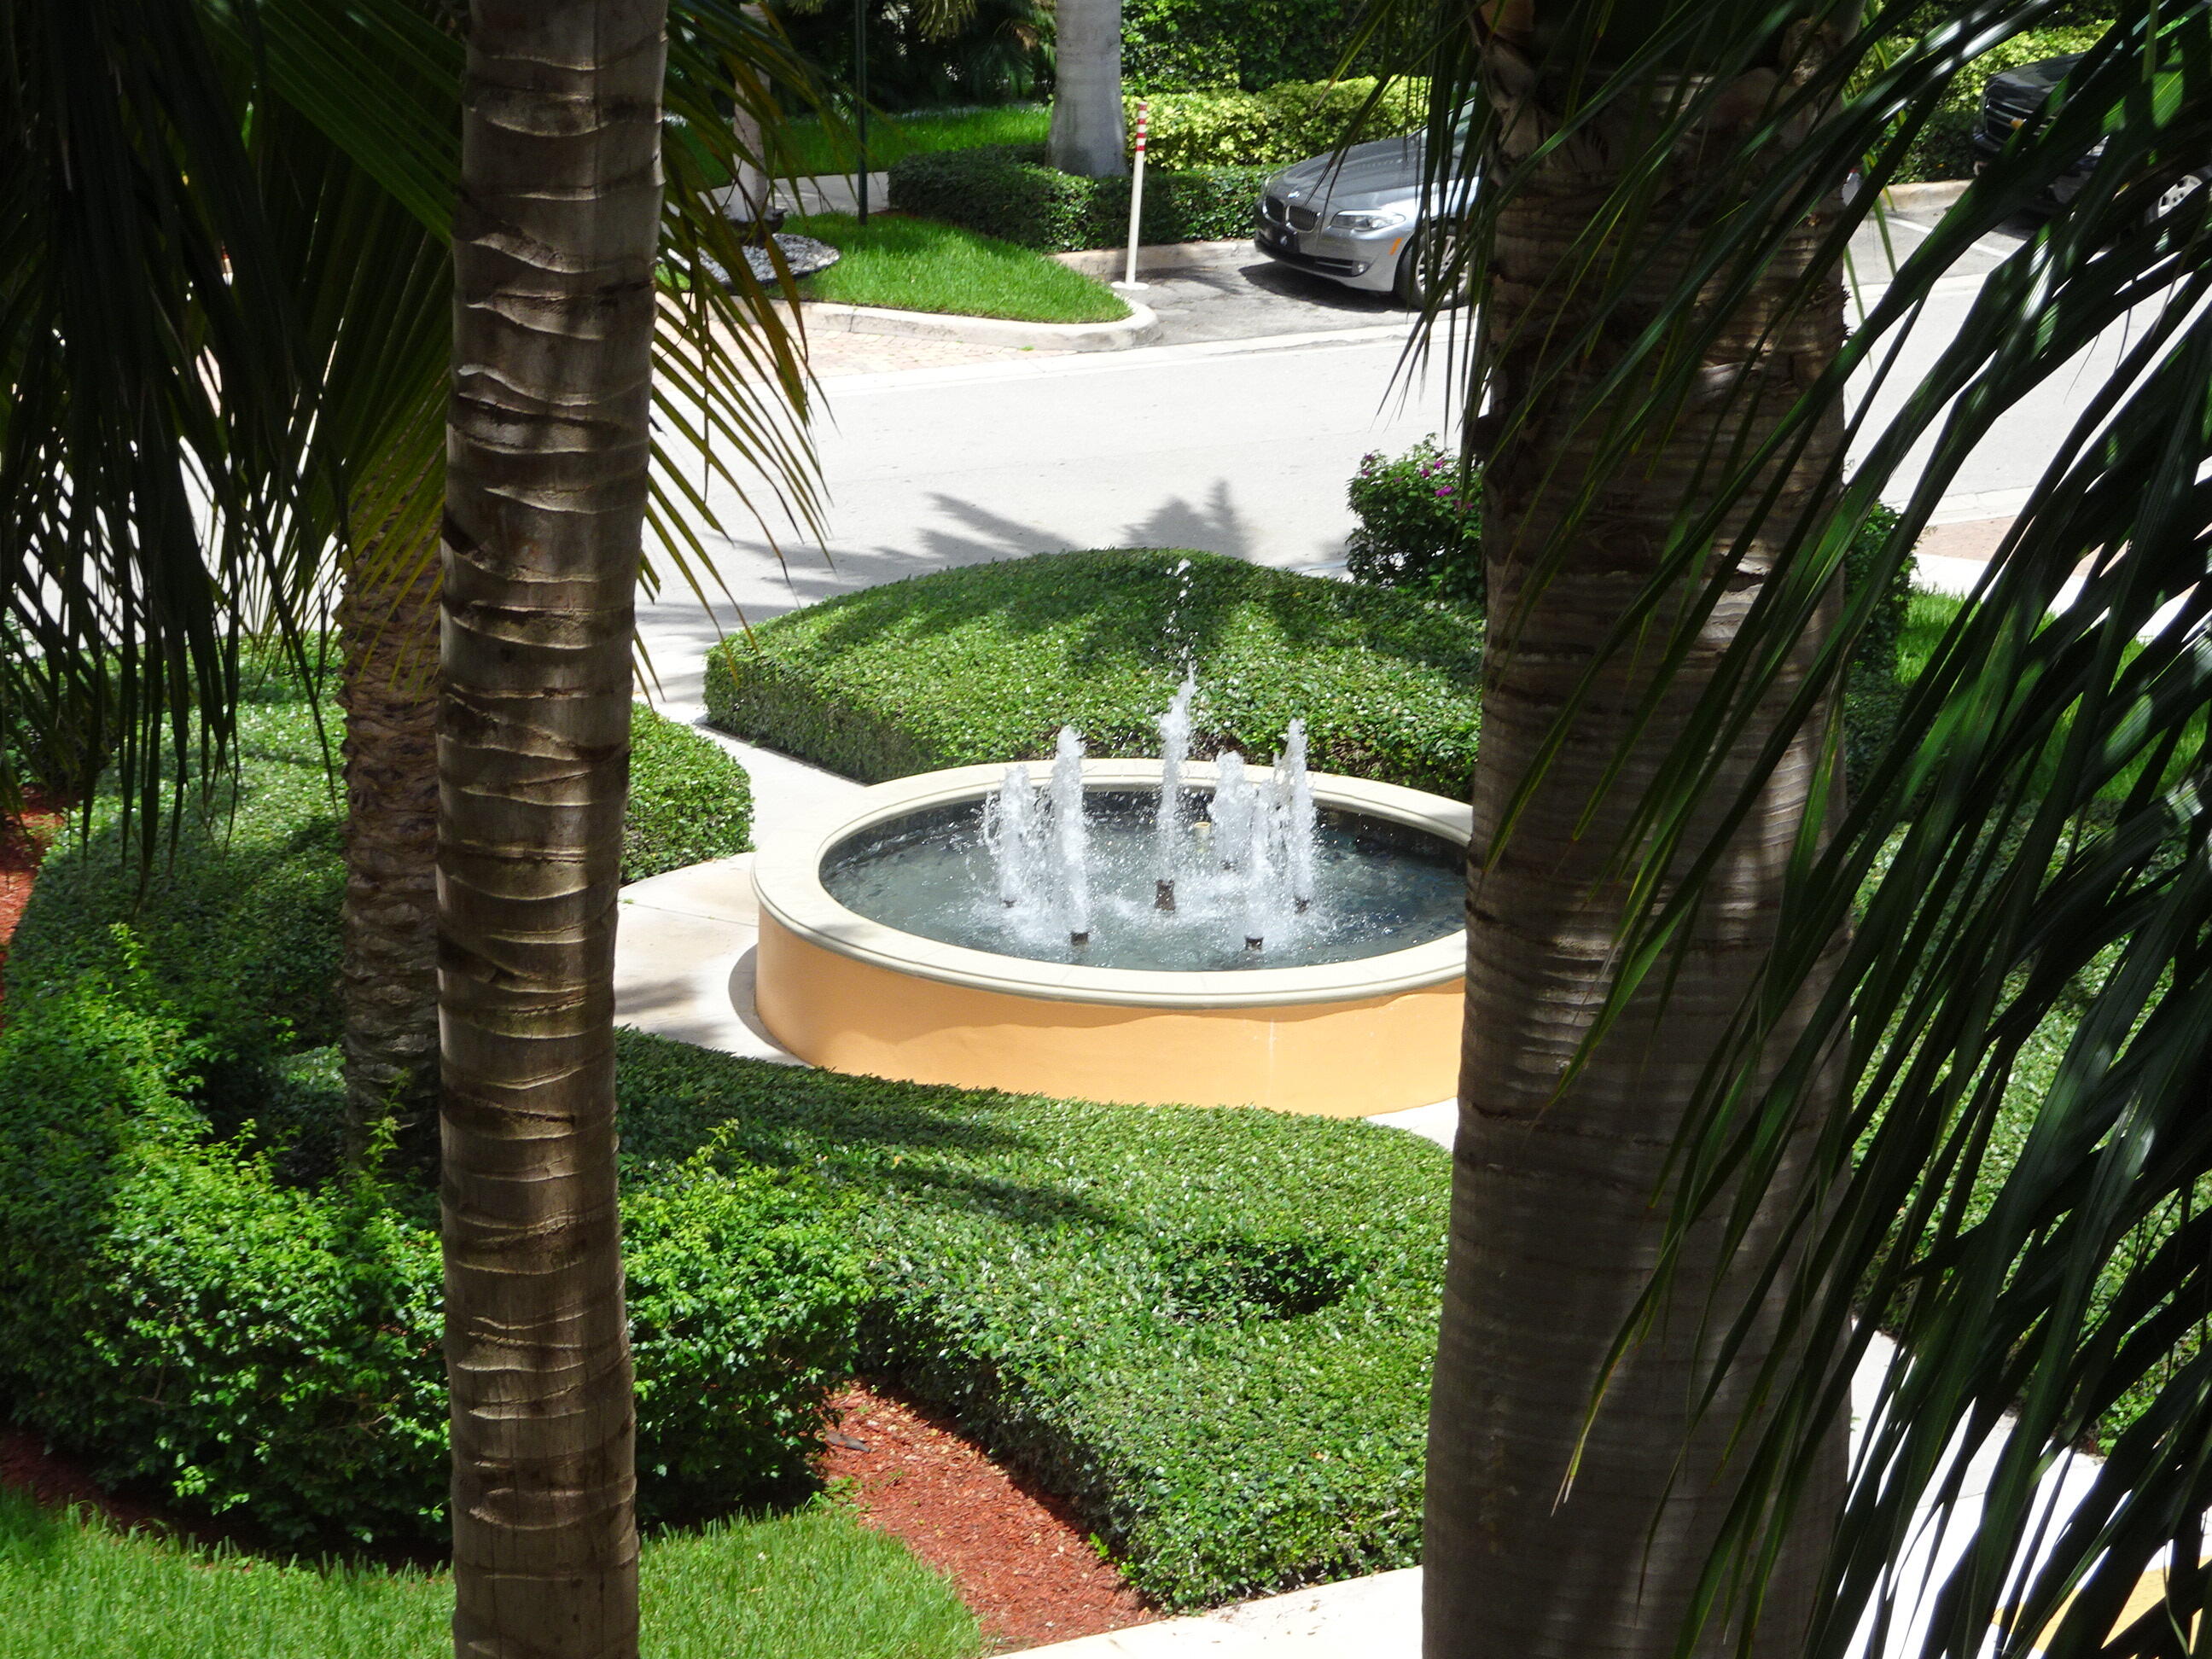 a view of fountain in the backyard of house